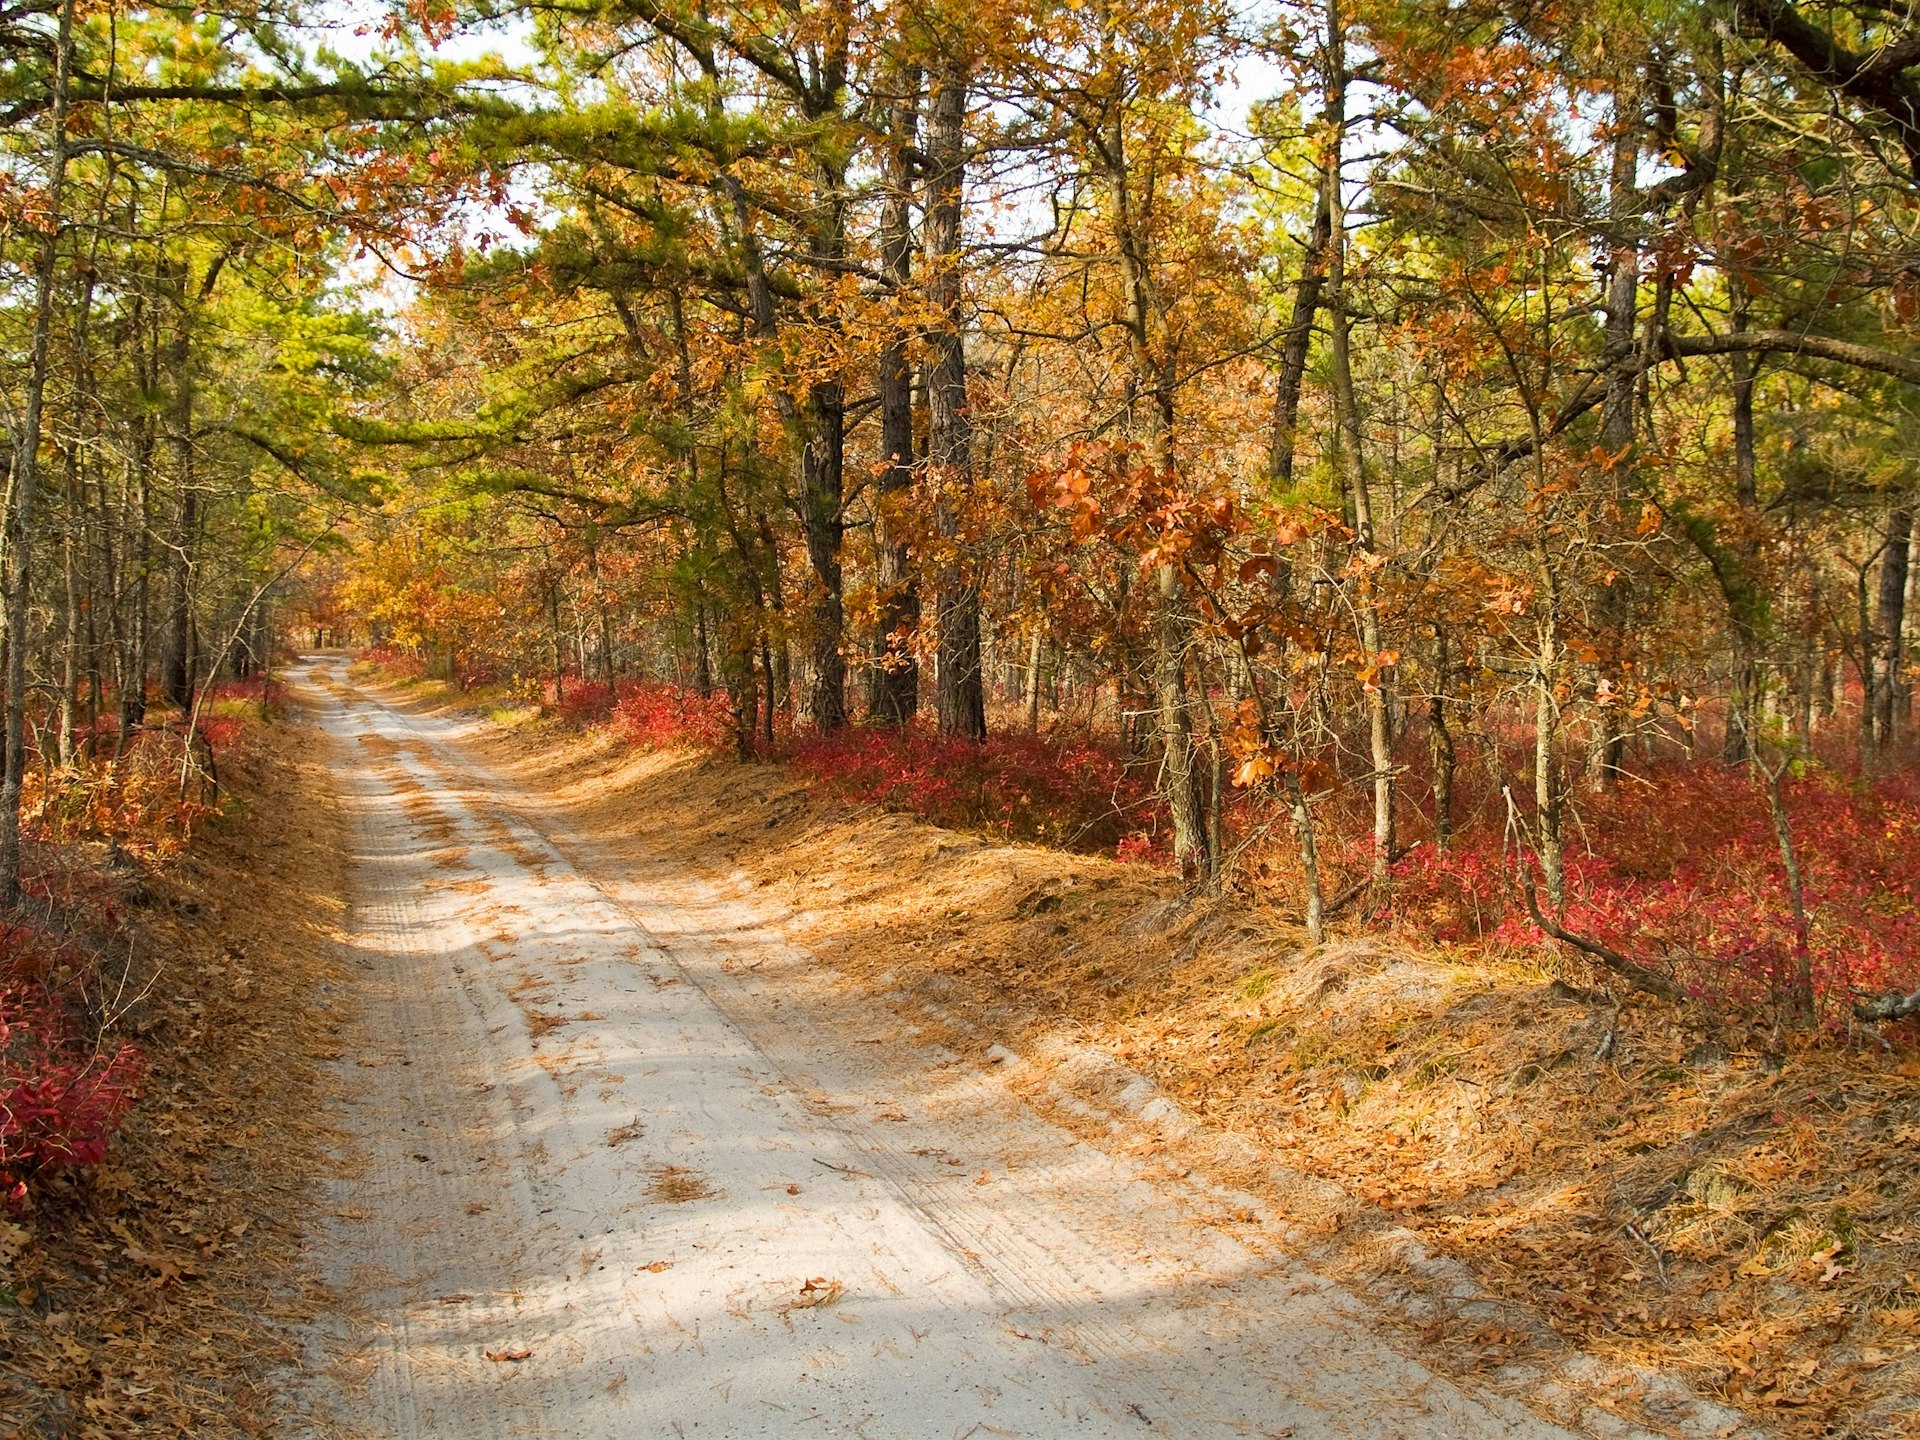 A dusty road cuts through fall trees at Pine Barrens in New Jersey